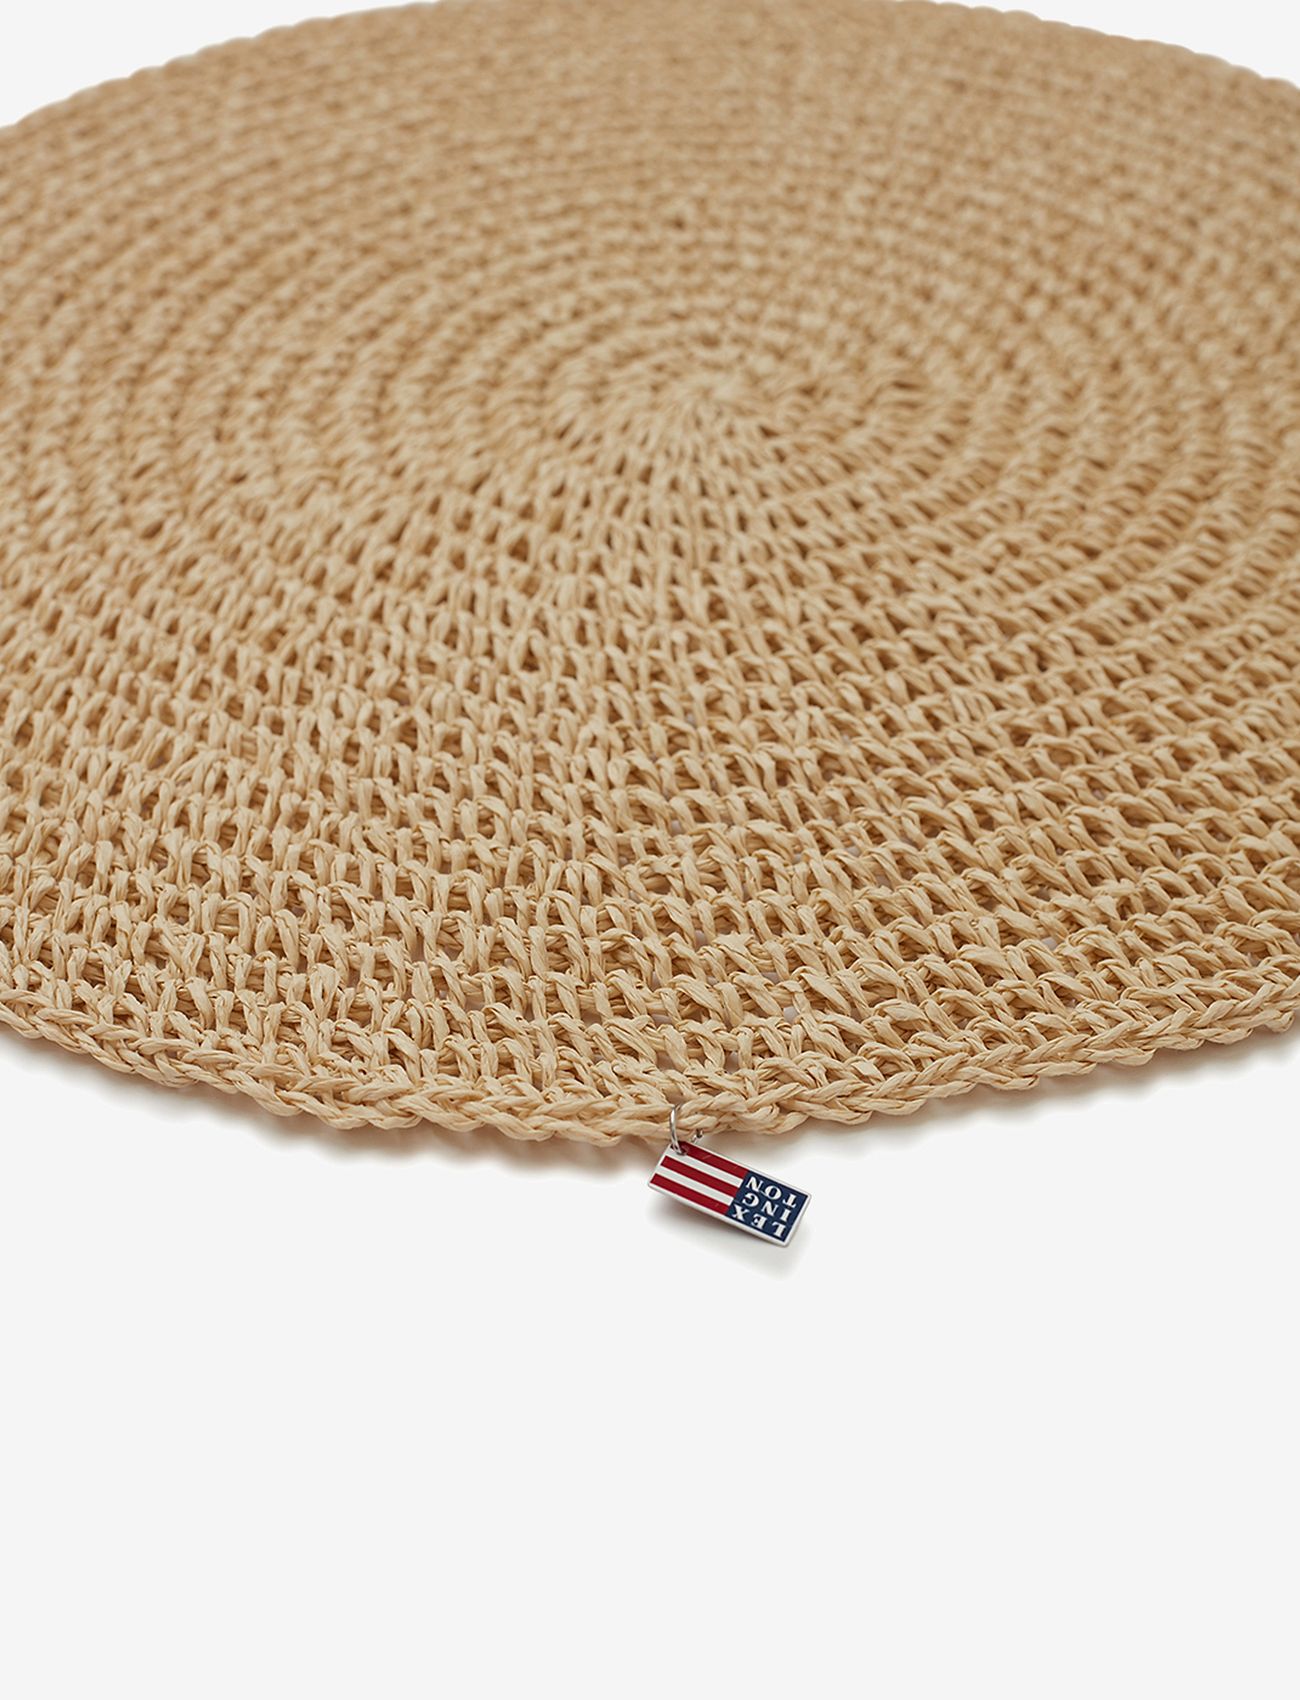 Lexington Home - Round Recycled Paper Straw Placemat - mažiausios kainos - natural - 1